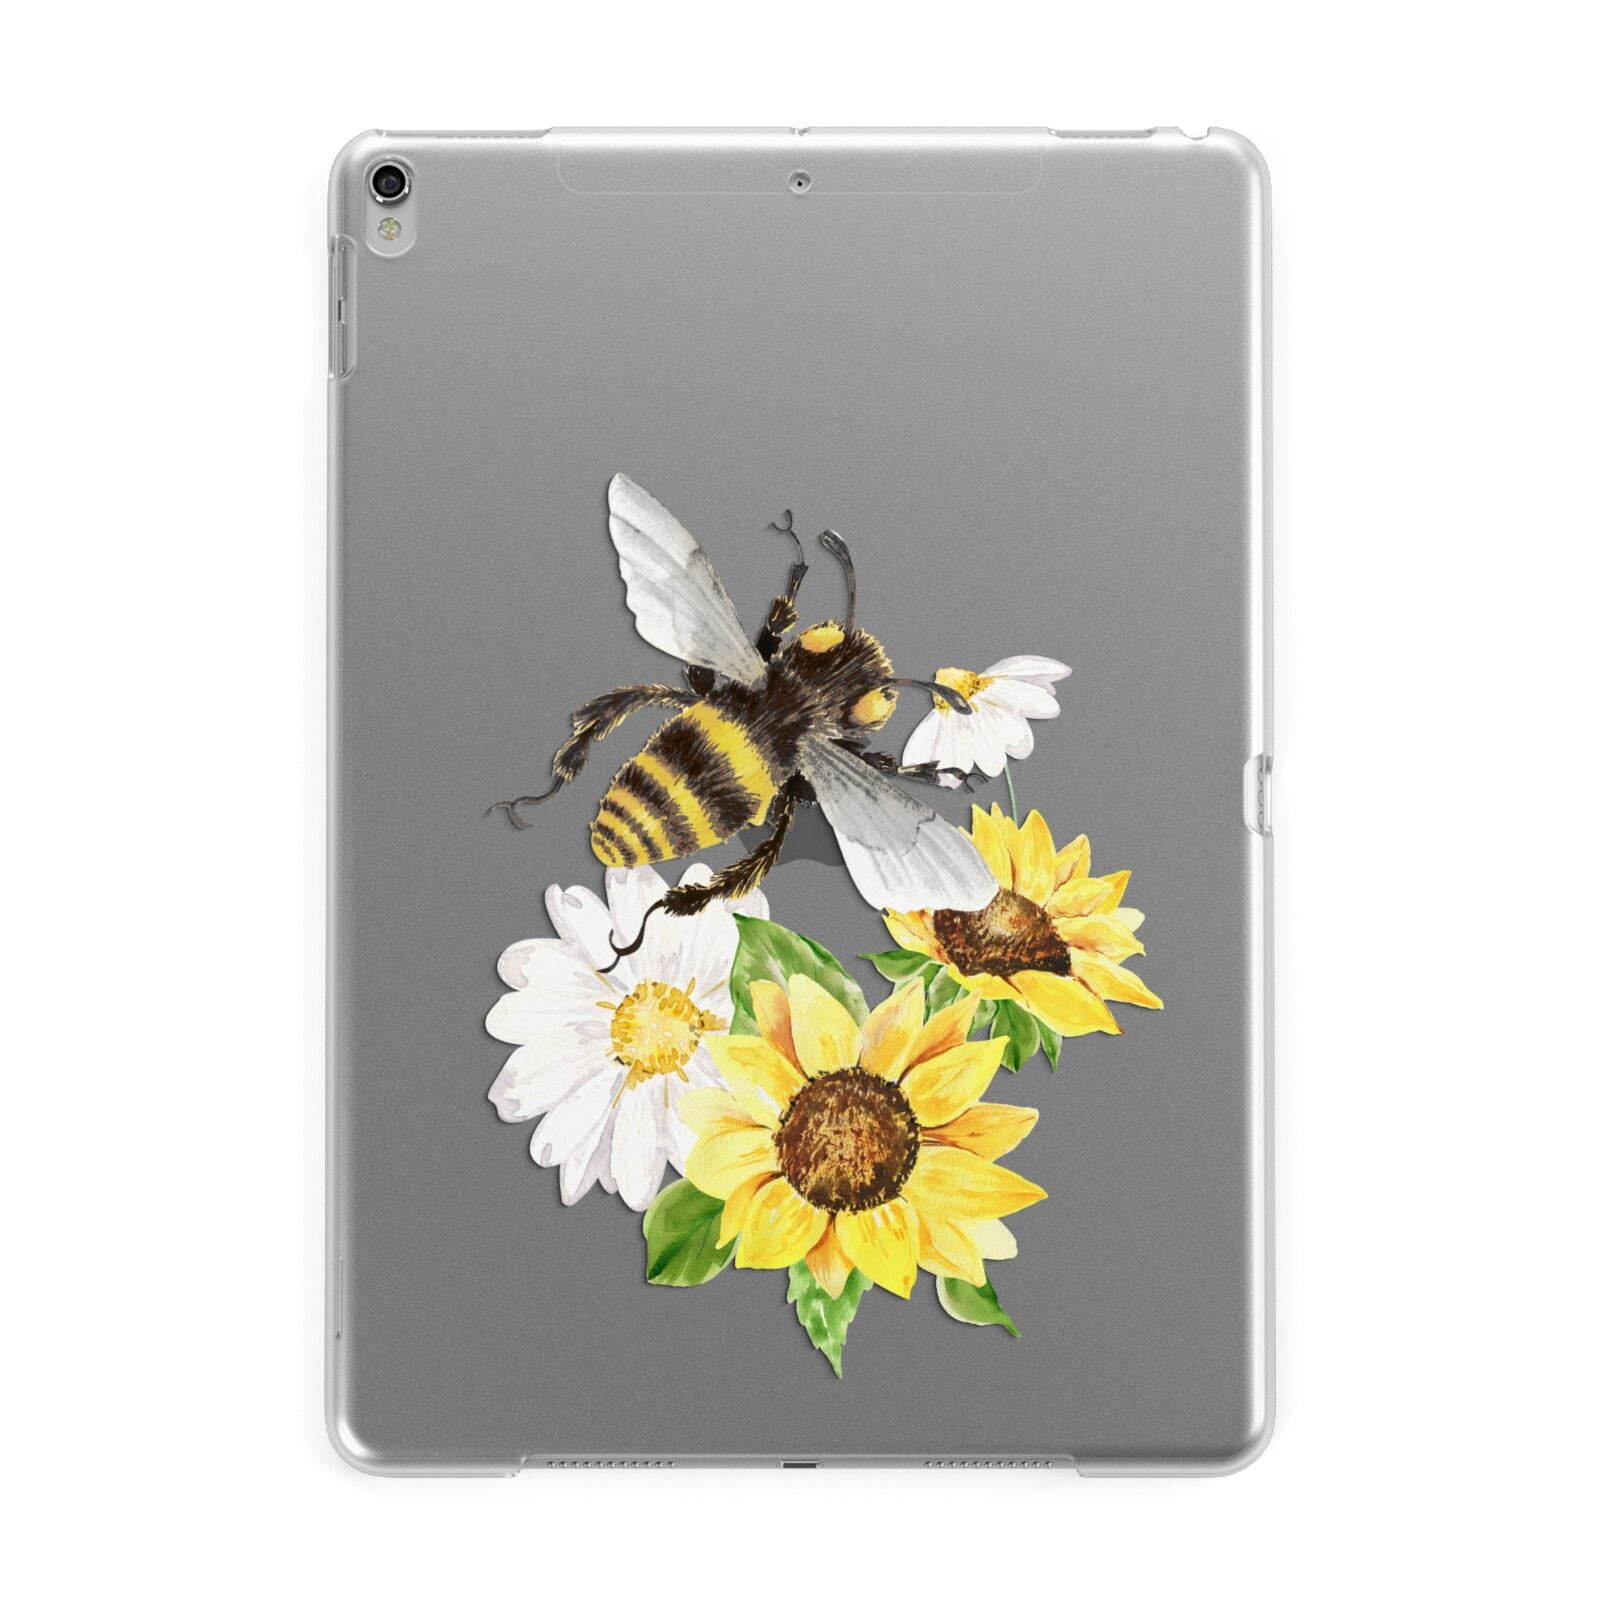 Watercolour Bee and Sunflowers Apple iPad Silver Case